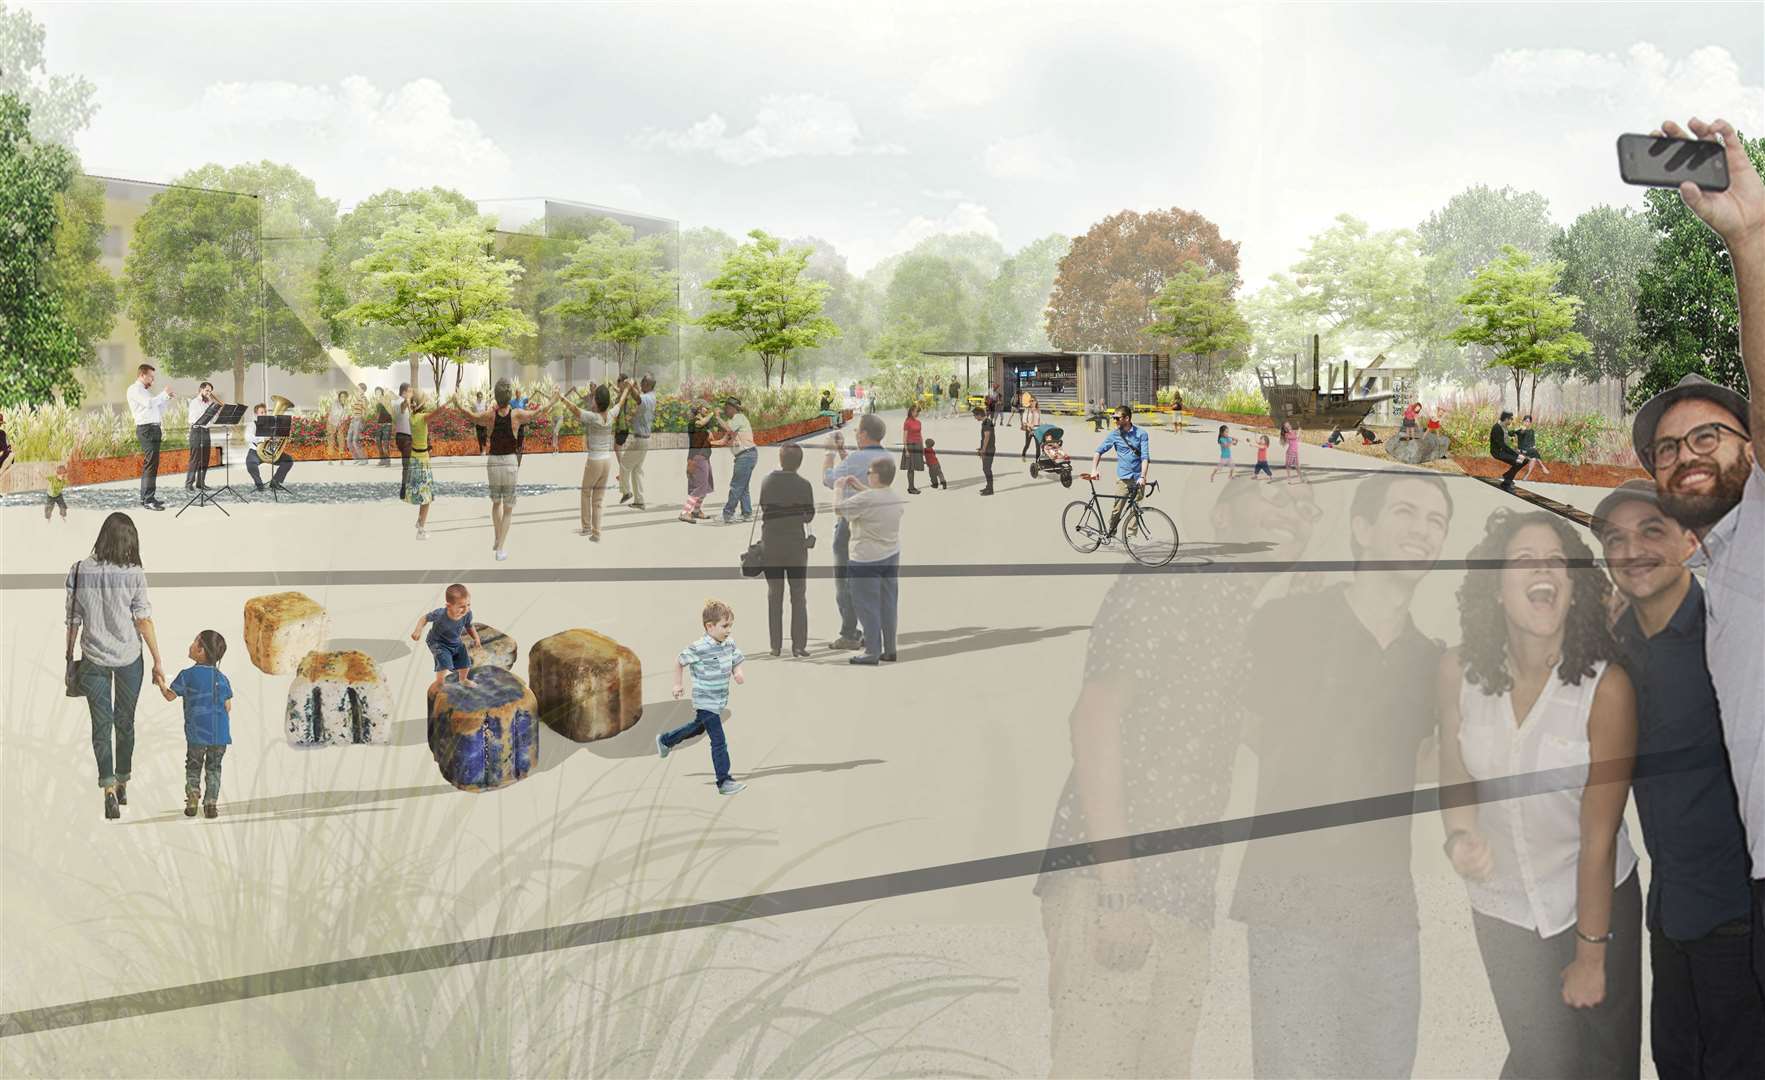 Ebbsfleet Garden City will look to create a new plaza and riverside green space